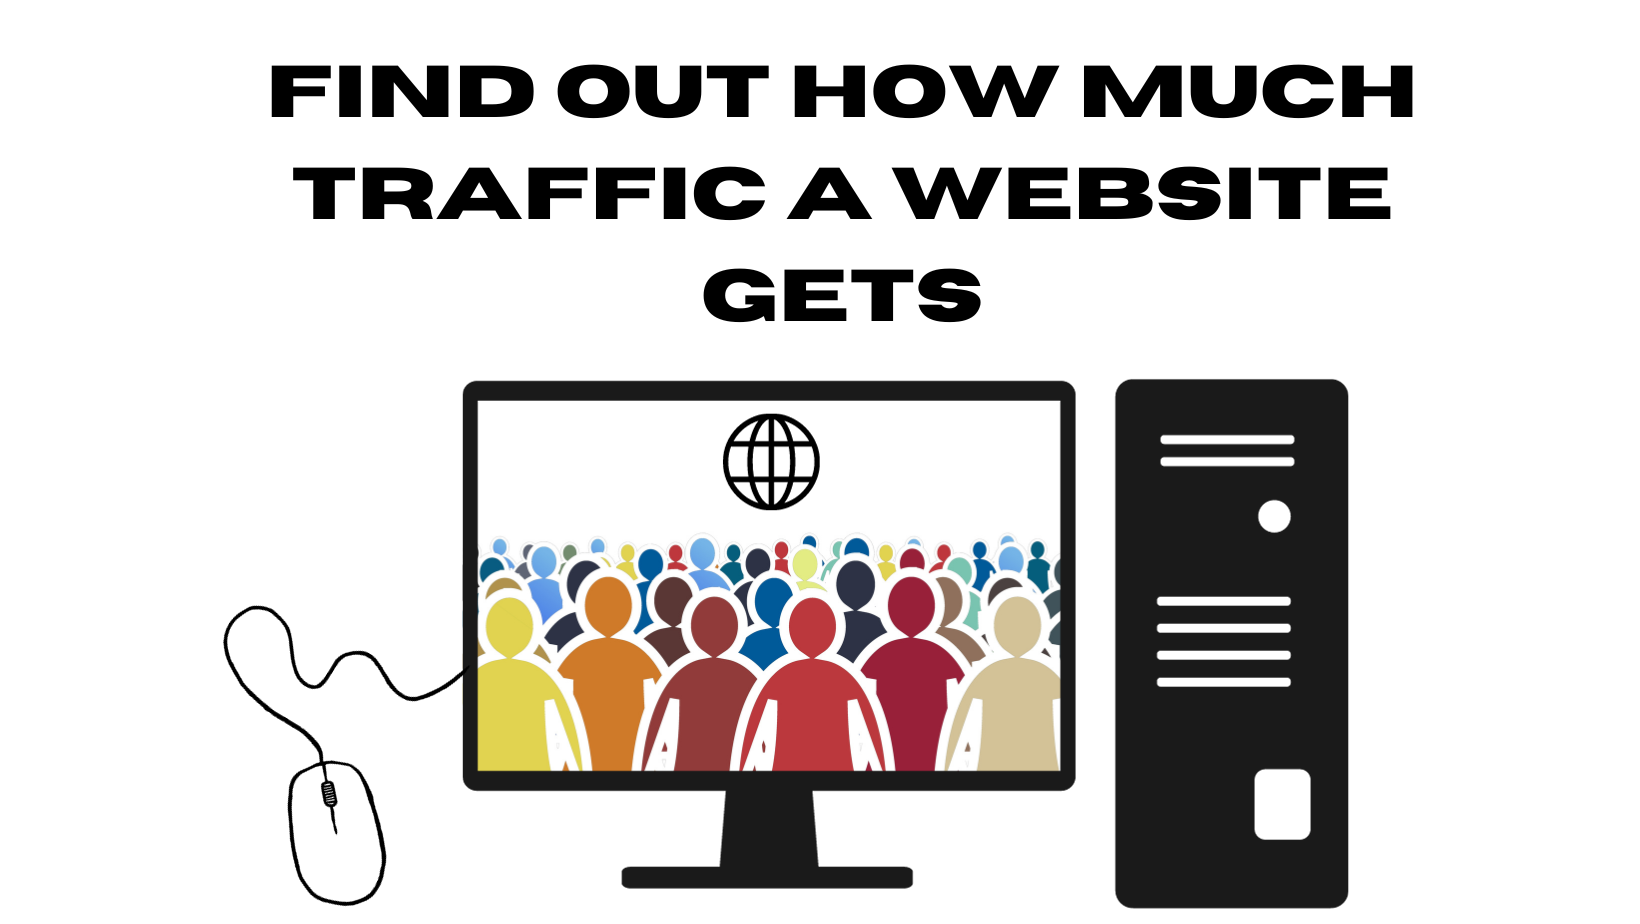 Find Out How Much Traffic a Website Gets